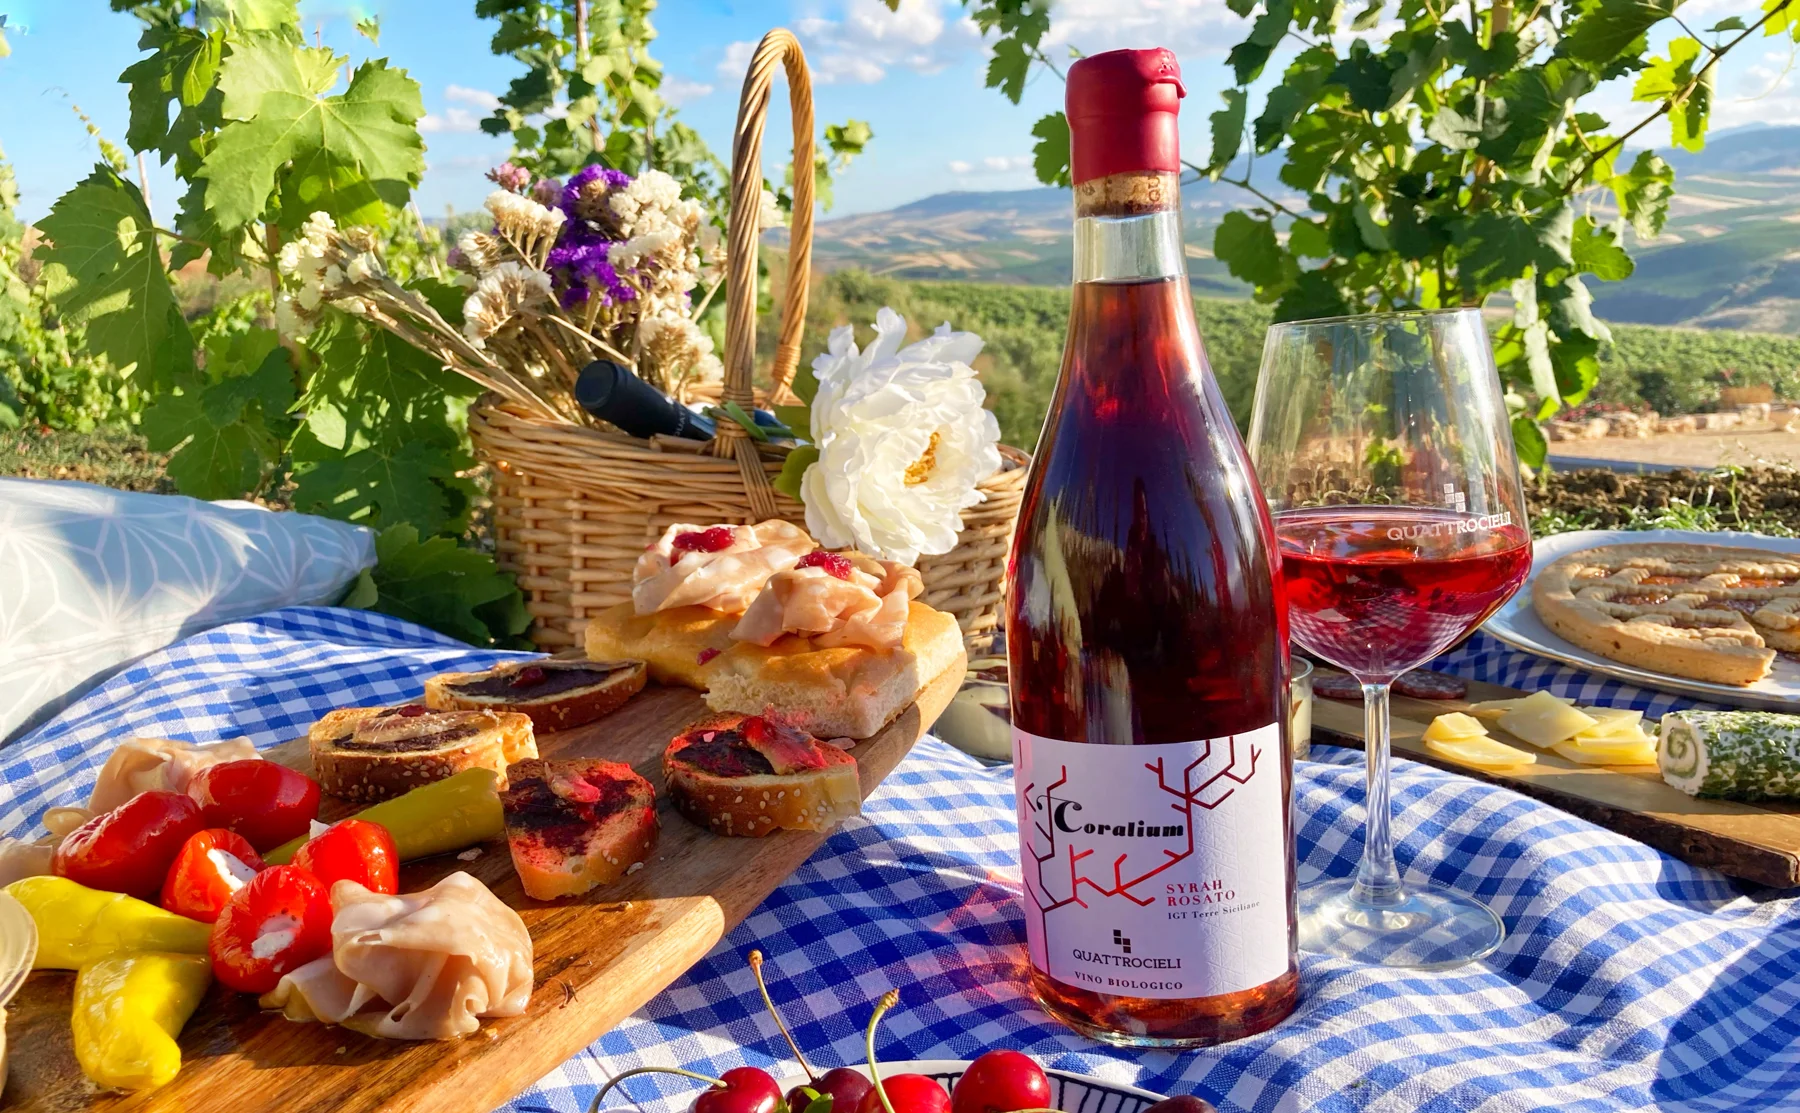 Pic-nic in winery - 1424884